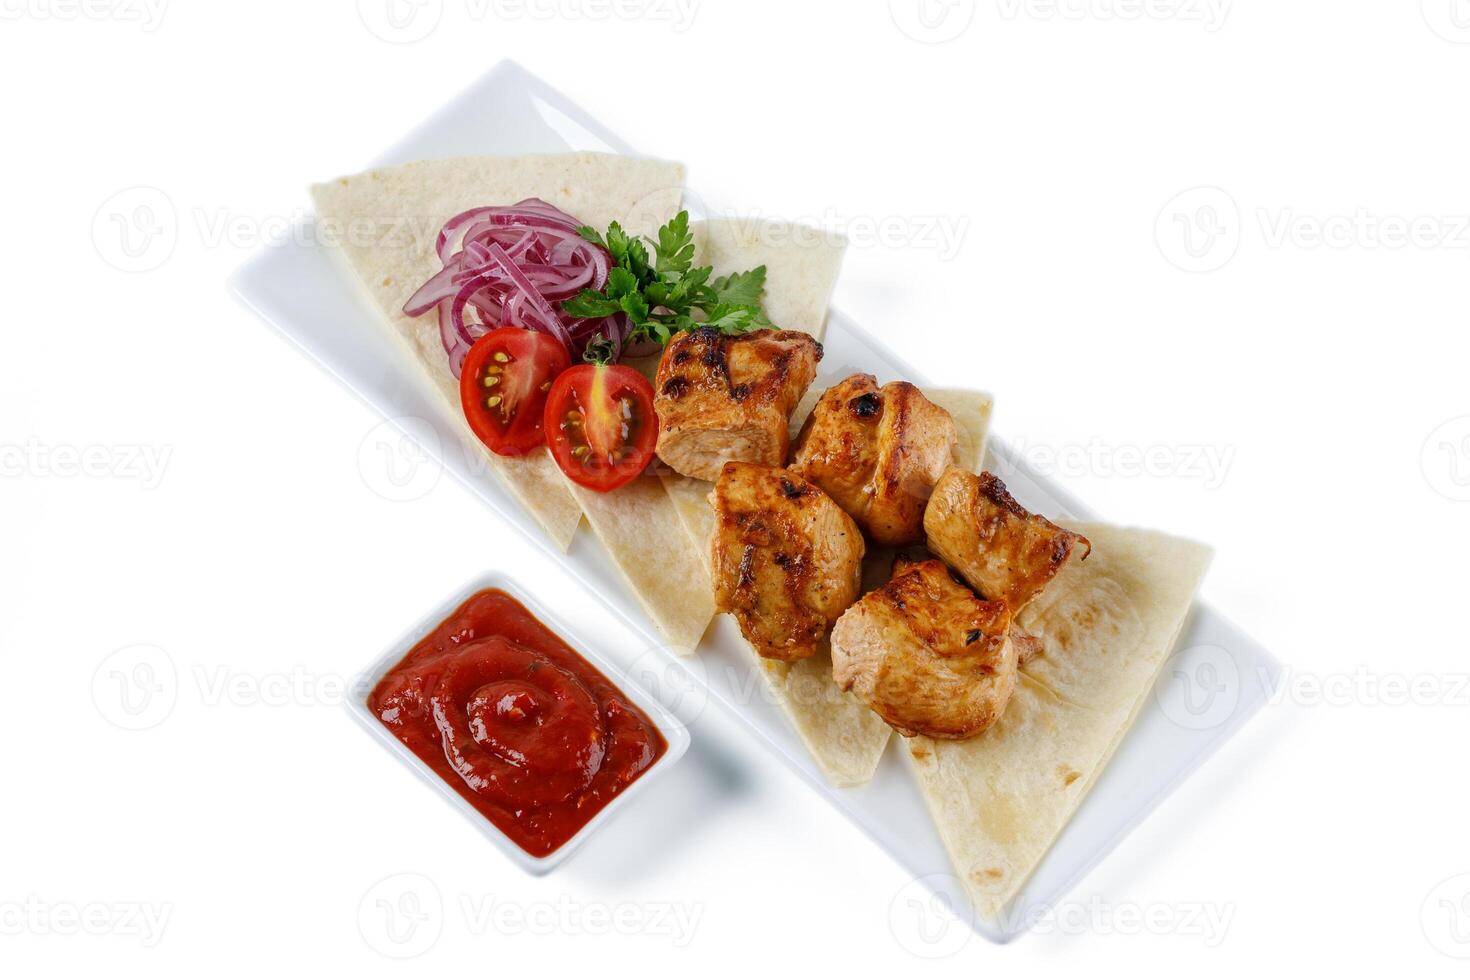 Chicken kebab skewers on a plate over light grey slate, stone or concrete background . Top view with copy space.1 photo